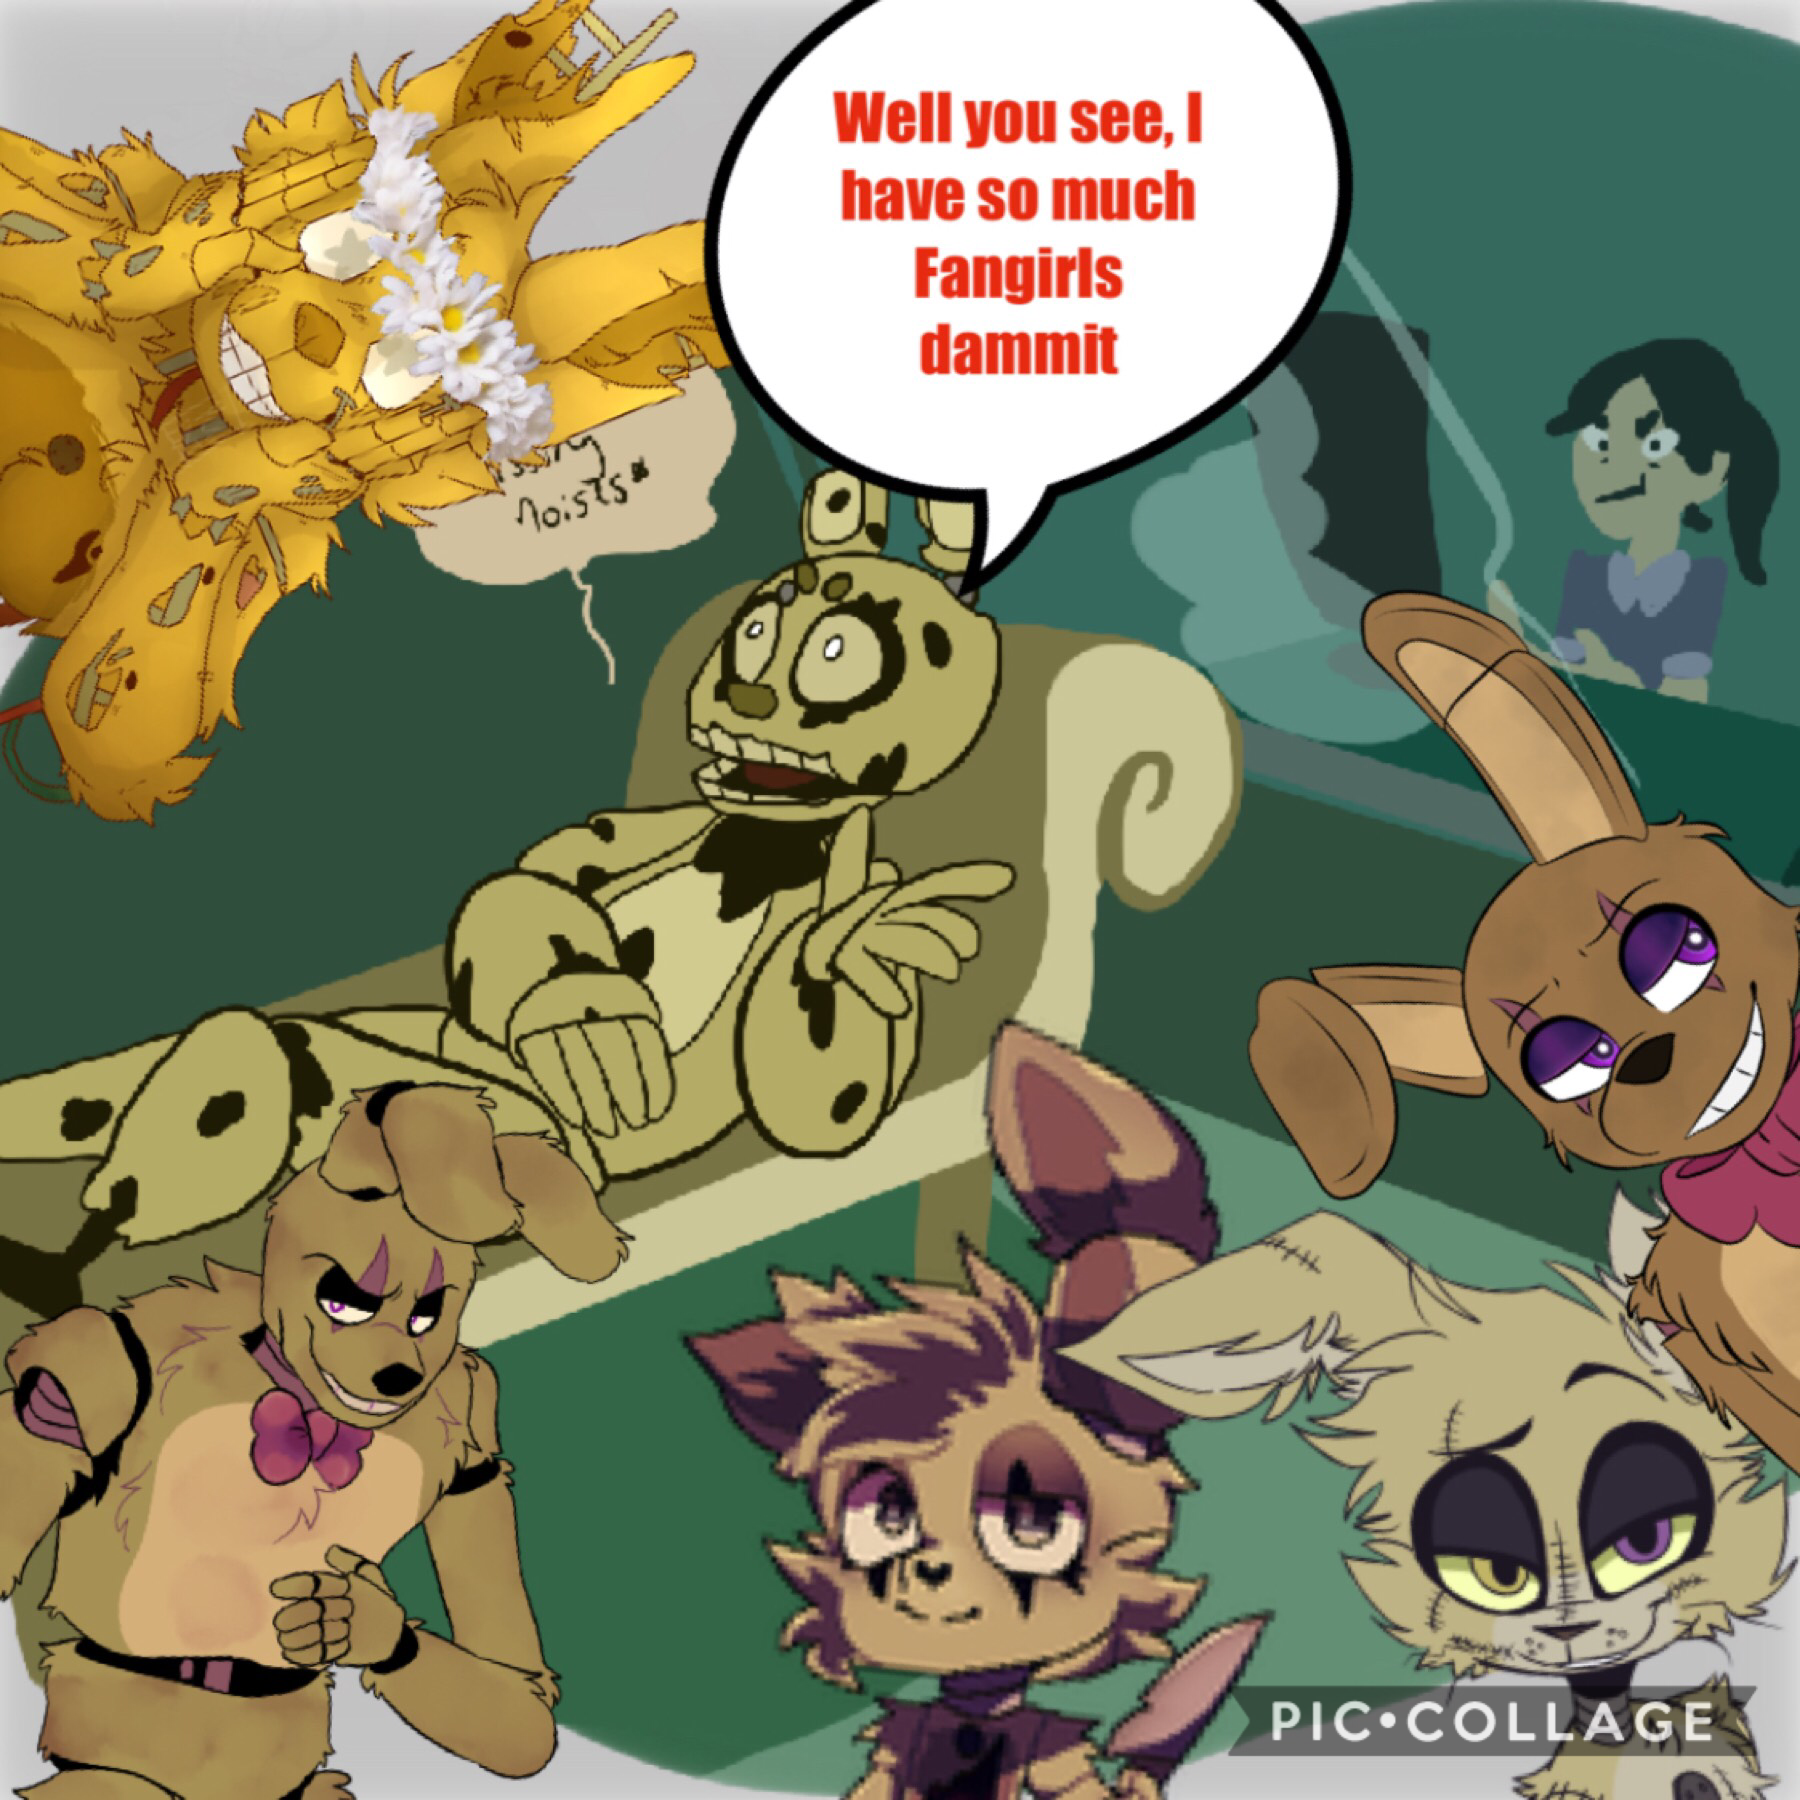 This is for all the Springtrap fangirls out there. Ft. Springtrap’s Therapist (credit goes out to all the artists!) HAPPY V DAY